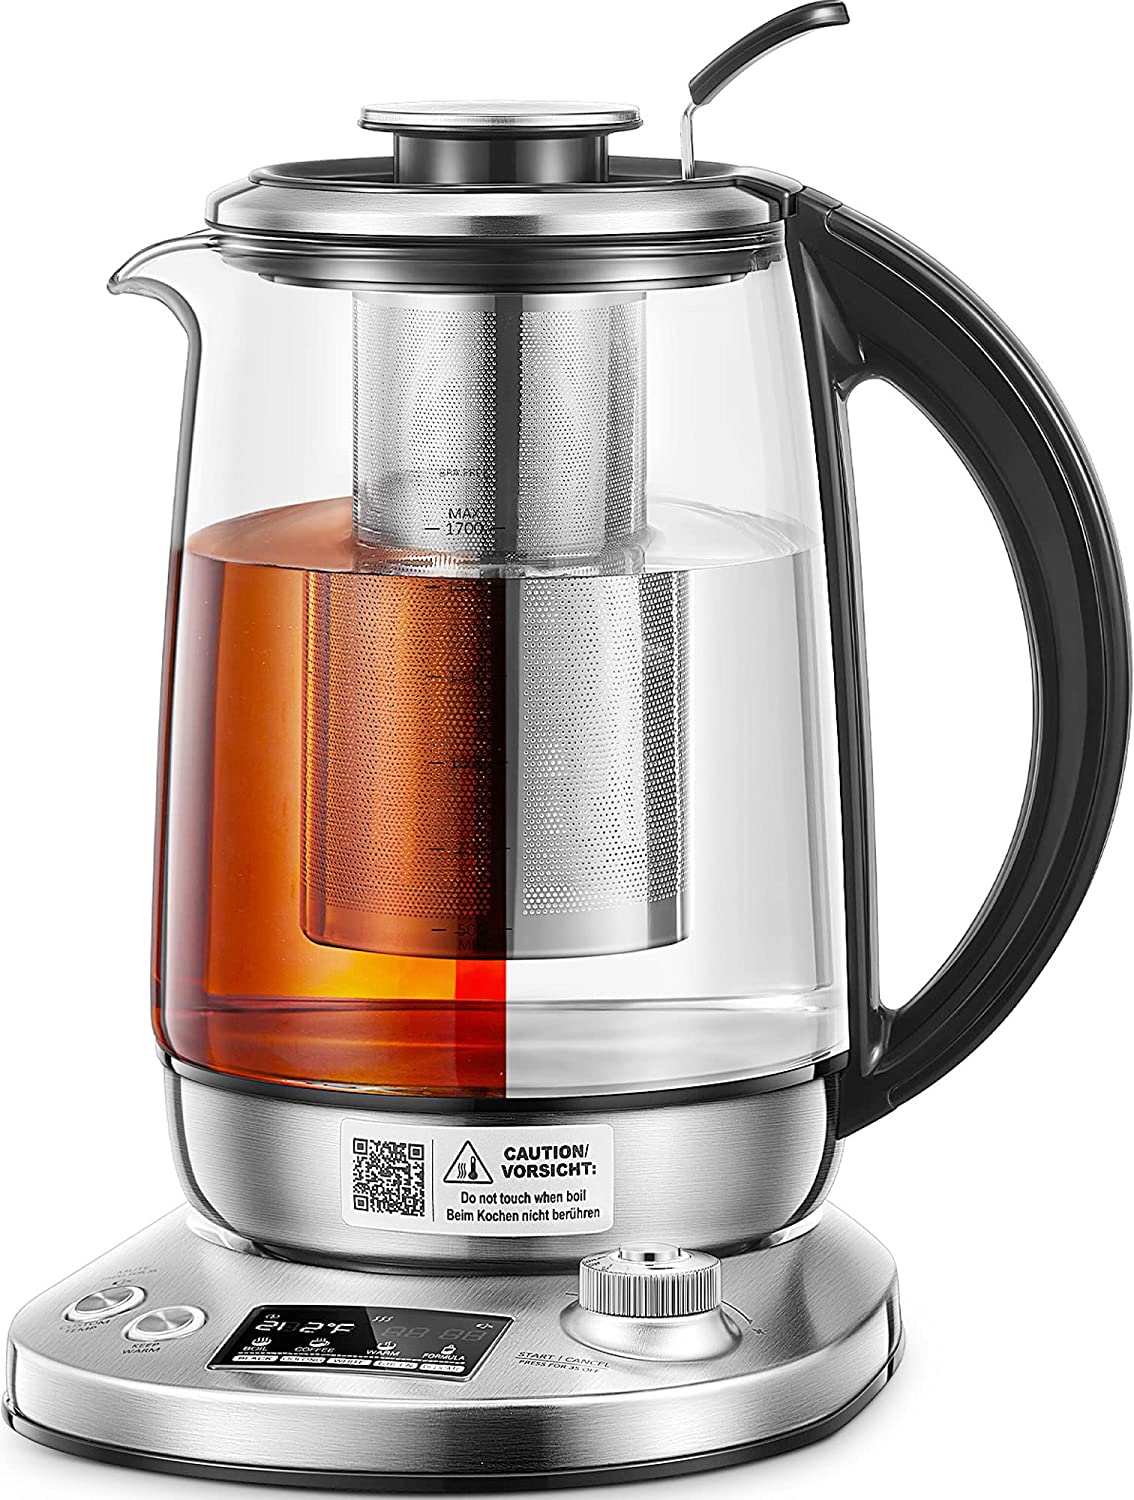 Electric Kettle, FOHERE Electric Tea Kettle with 9 Presets, 1.7 Liter Tea Maker with Removable Infuser, 140℉ to 212℉ Precise Temperature Control, 1200W, Borosilicate Glass | Stainless Steel